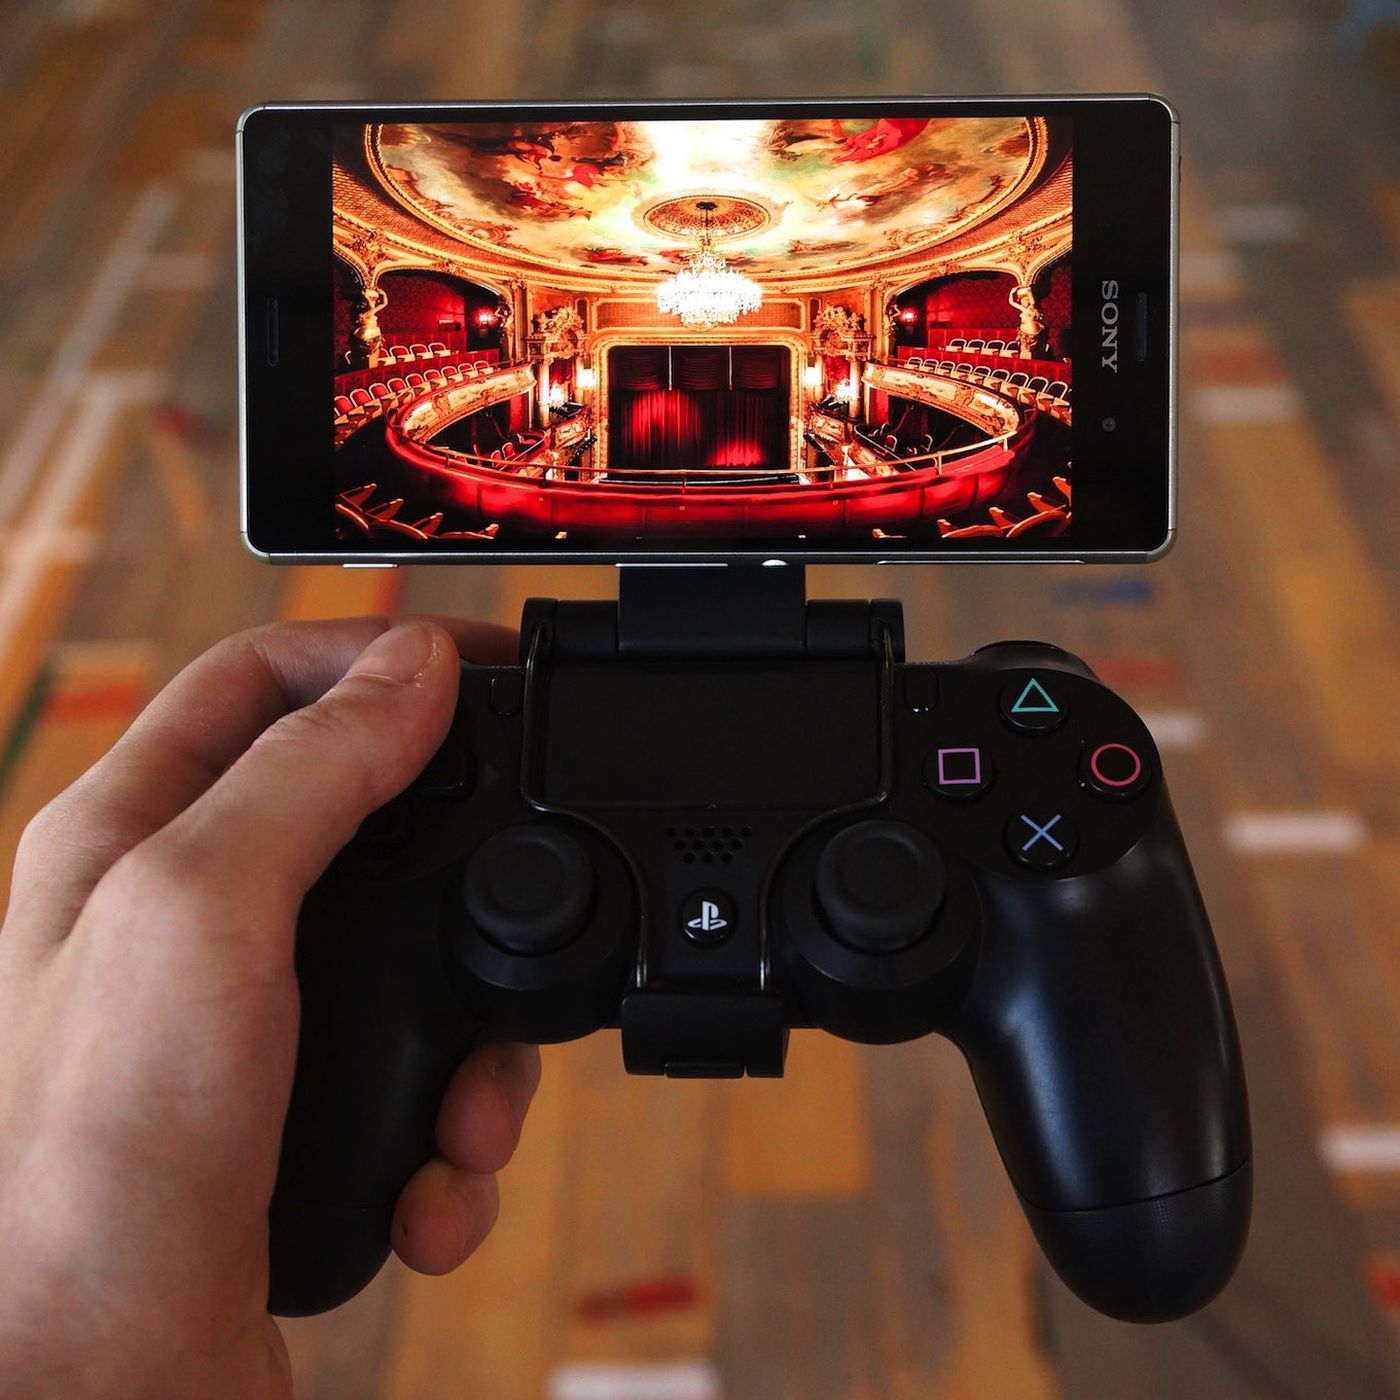 ps4-remote-play-on-xperia-step-by-step-instructions